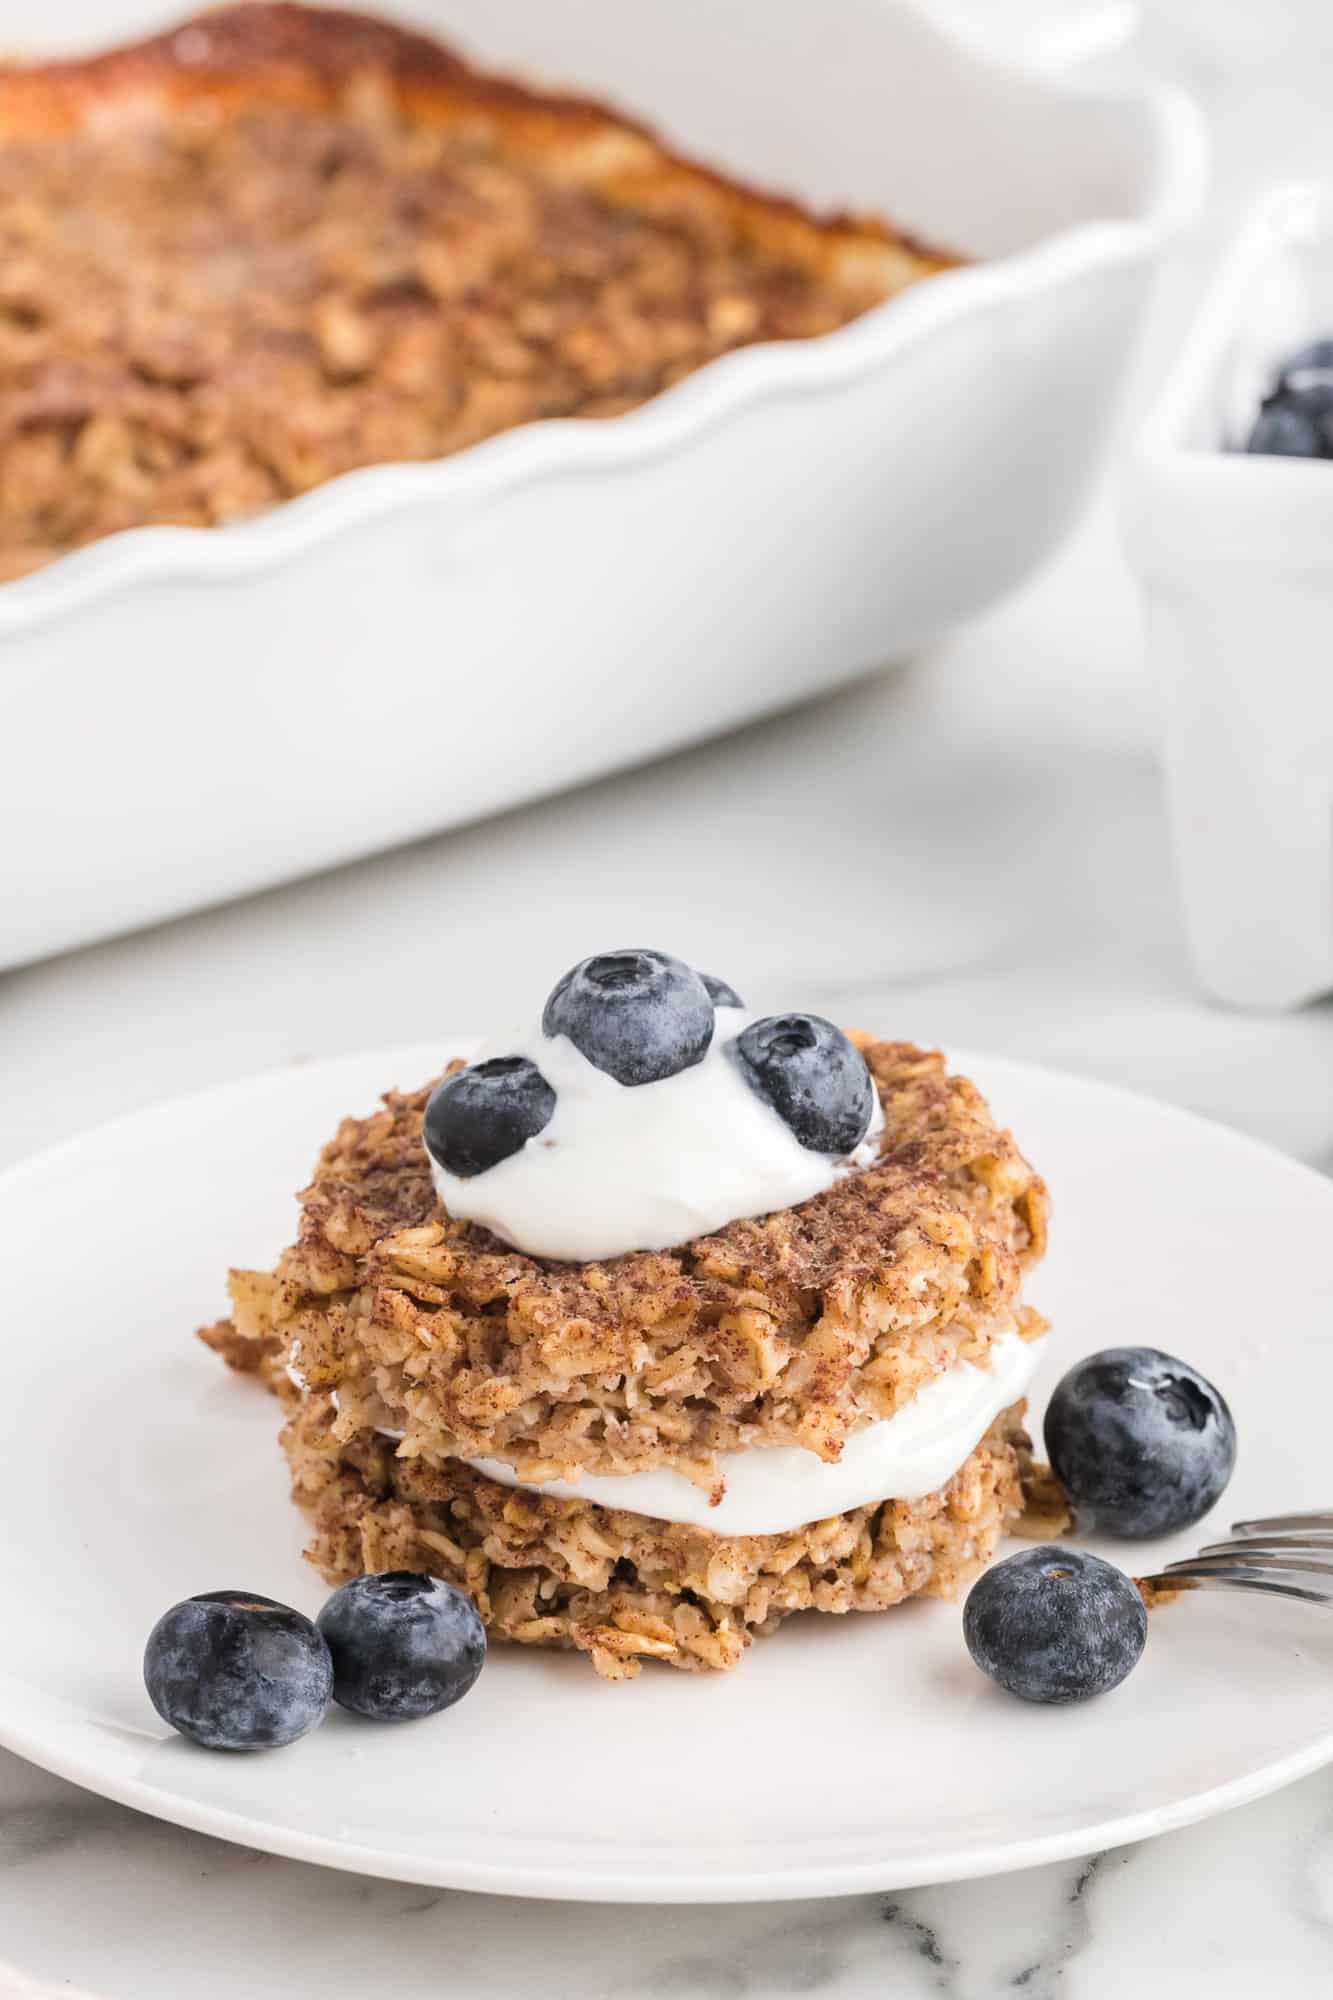 Baked oatmeal layered with yogurt and blueberries.